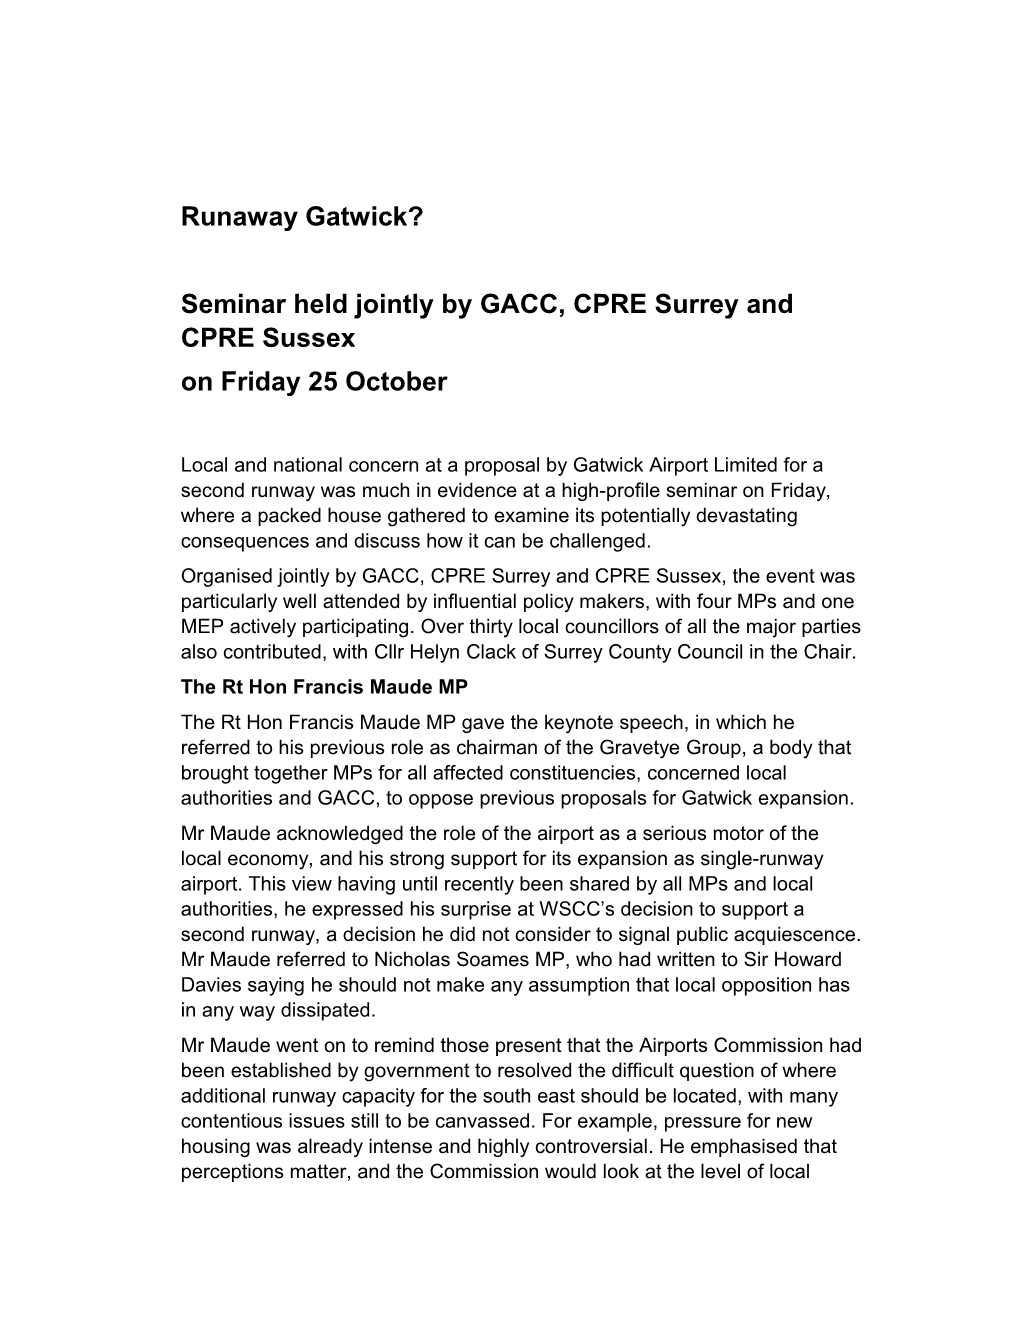 Seminar Held Jointly by GACC, CPRE Surrey and CPRE Sussex